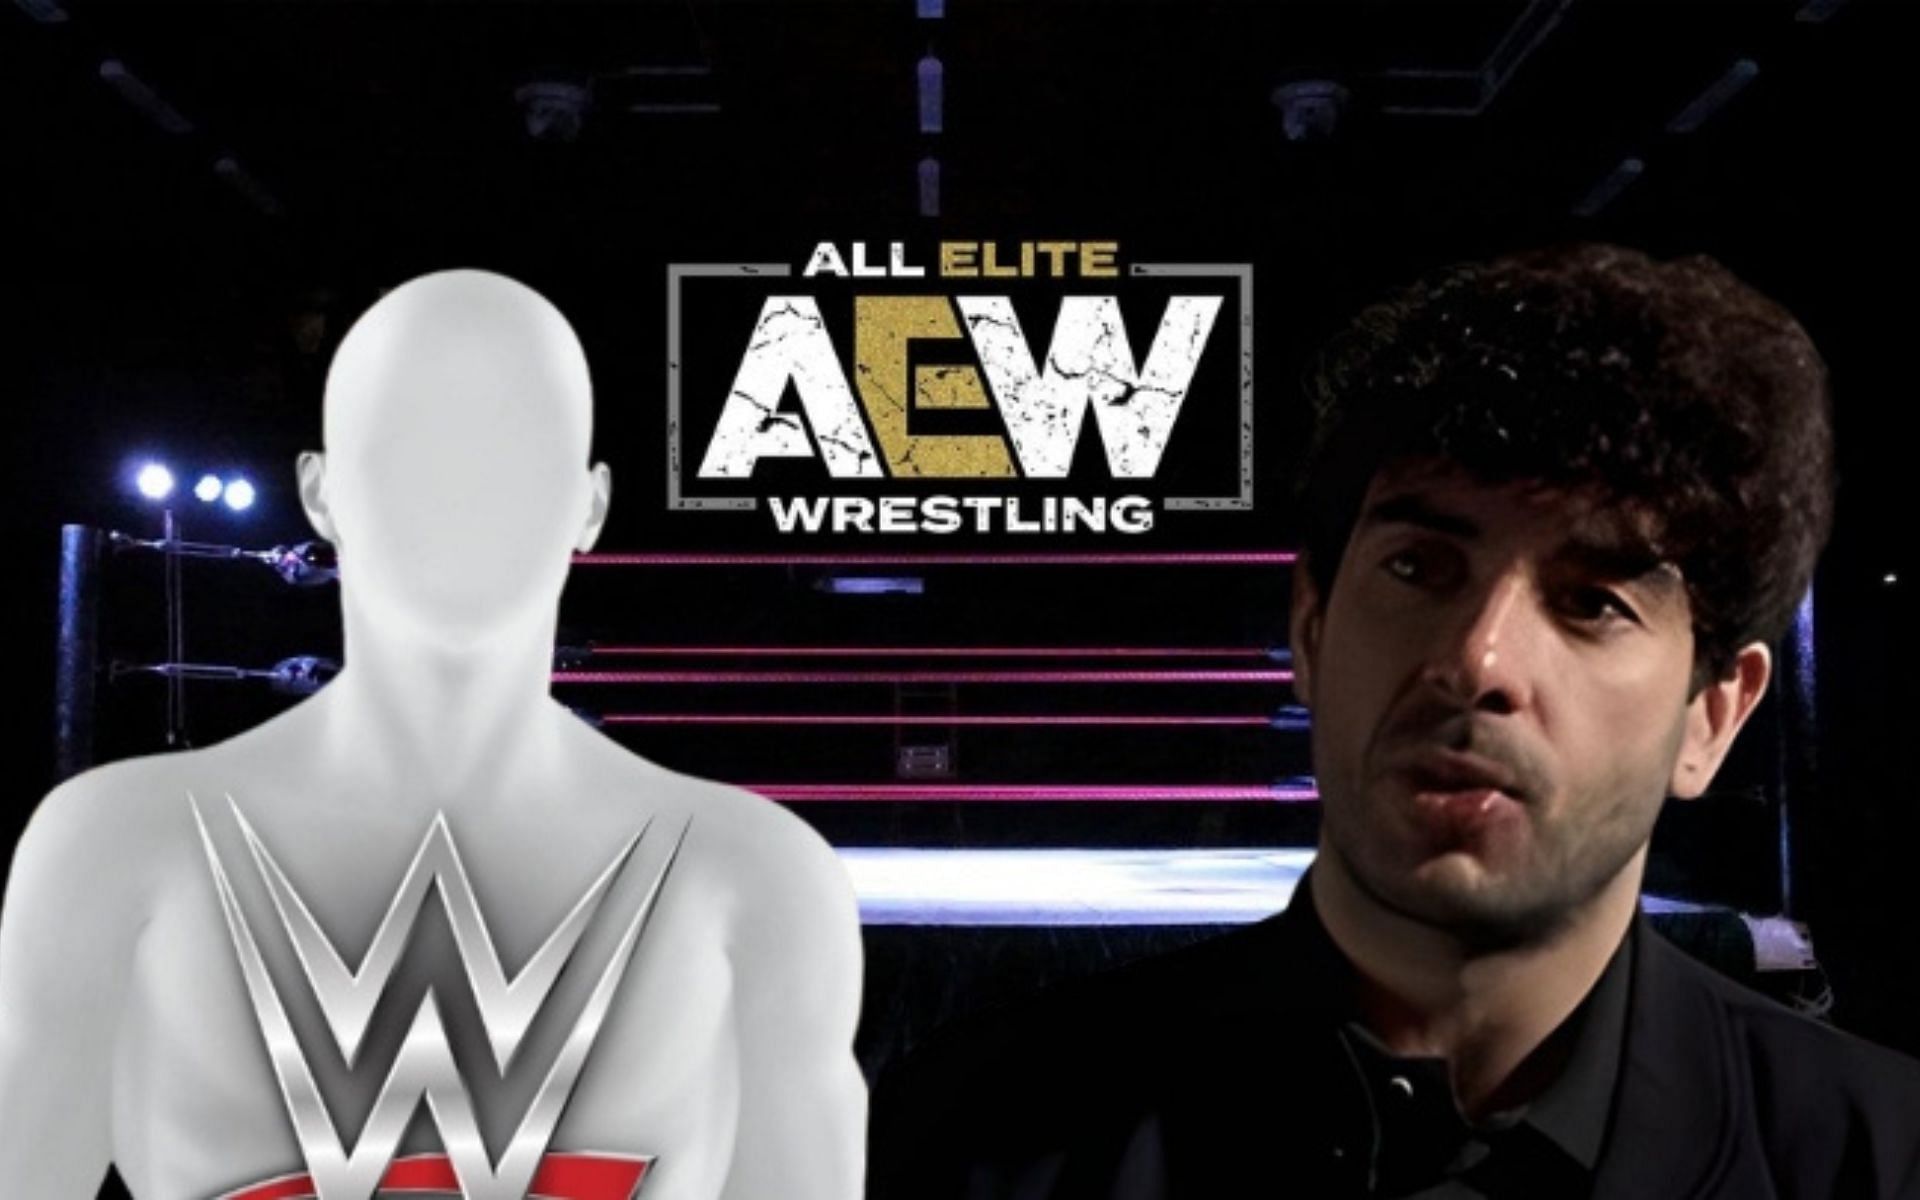 Tony Khan has promoted the death match culture in AEW.